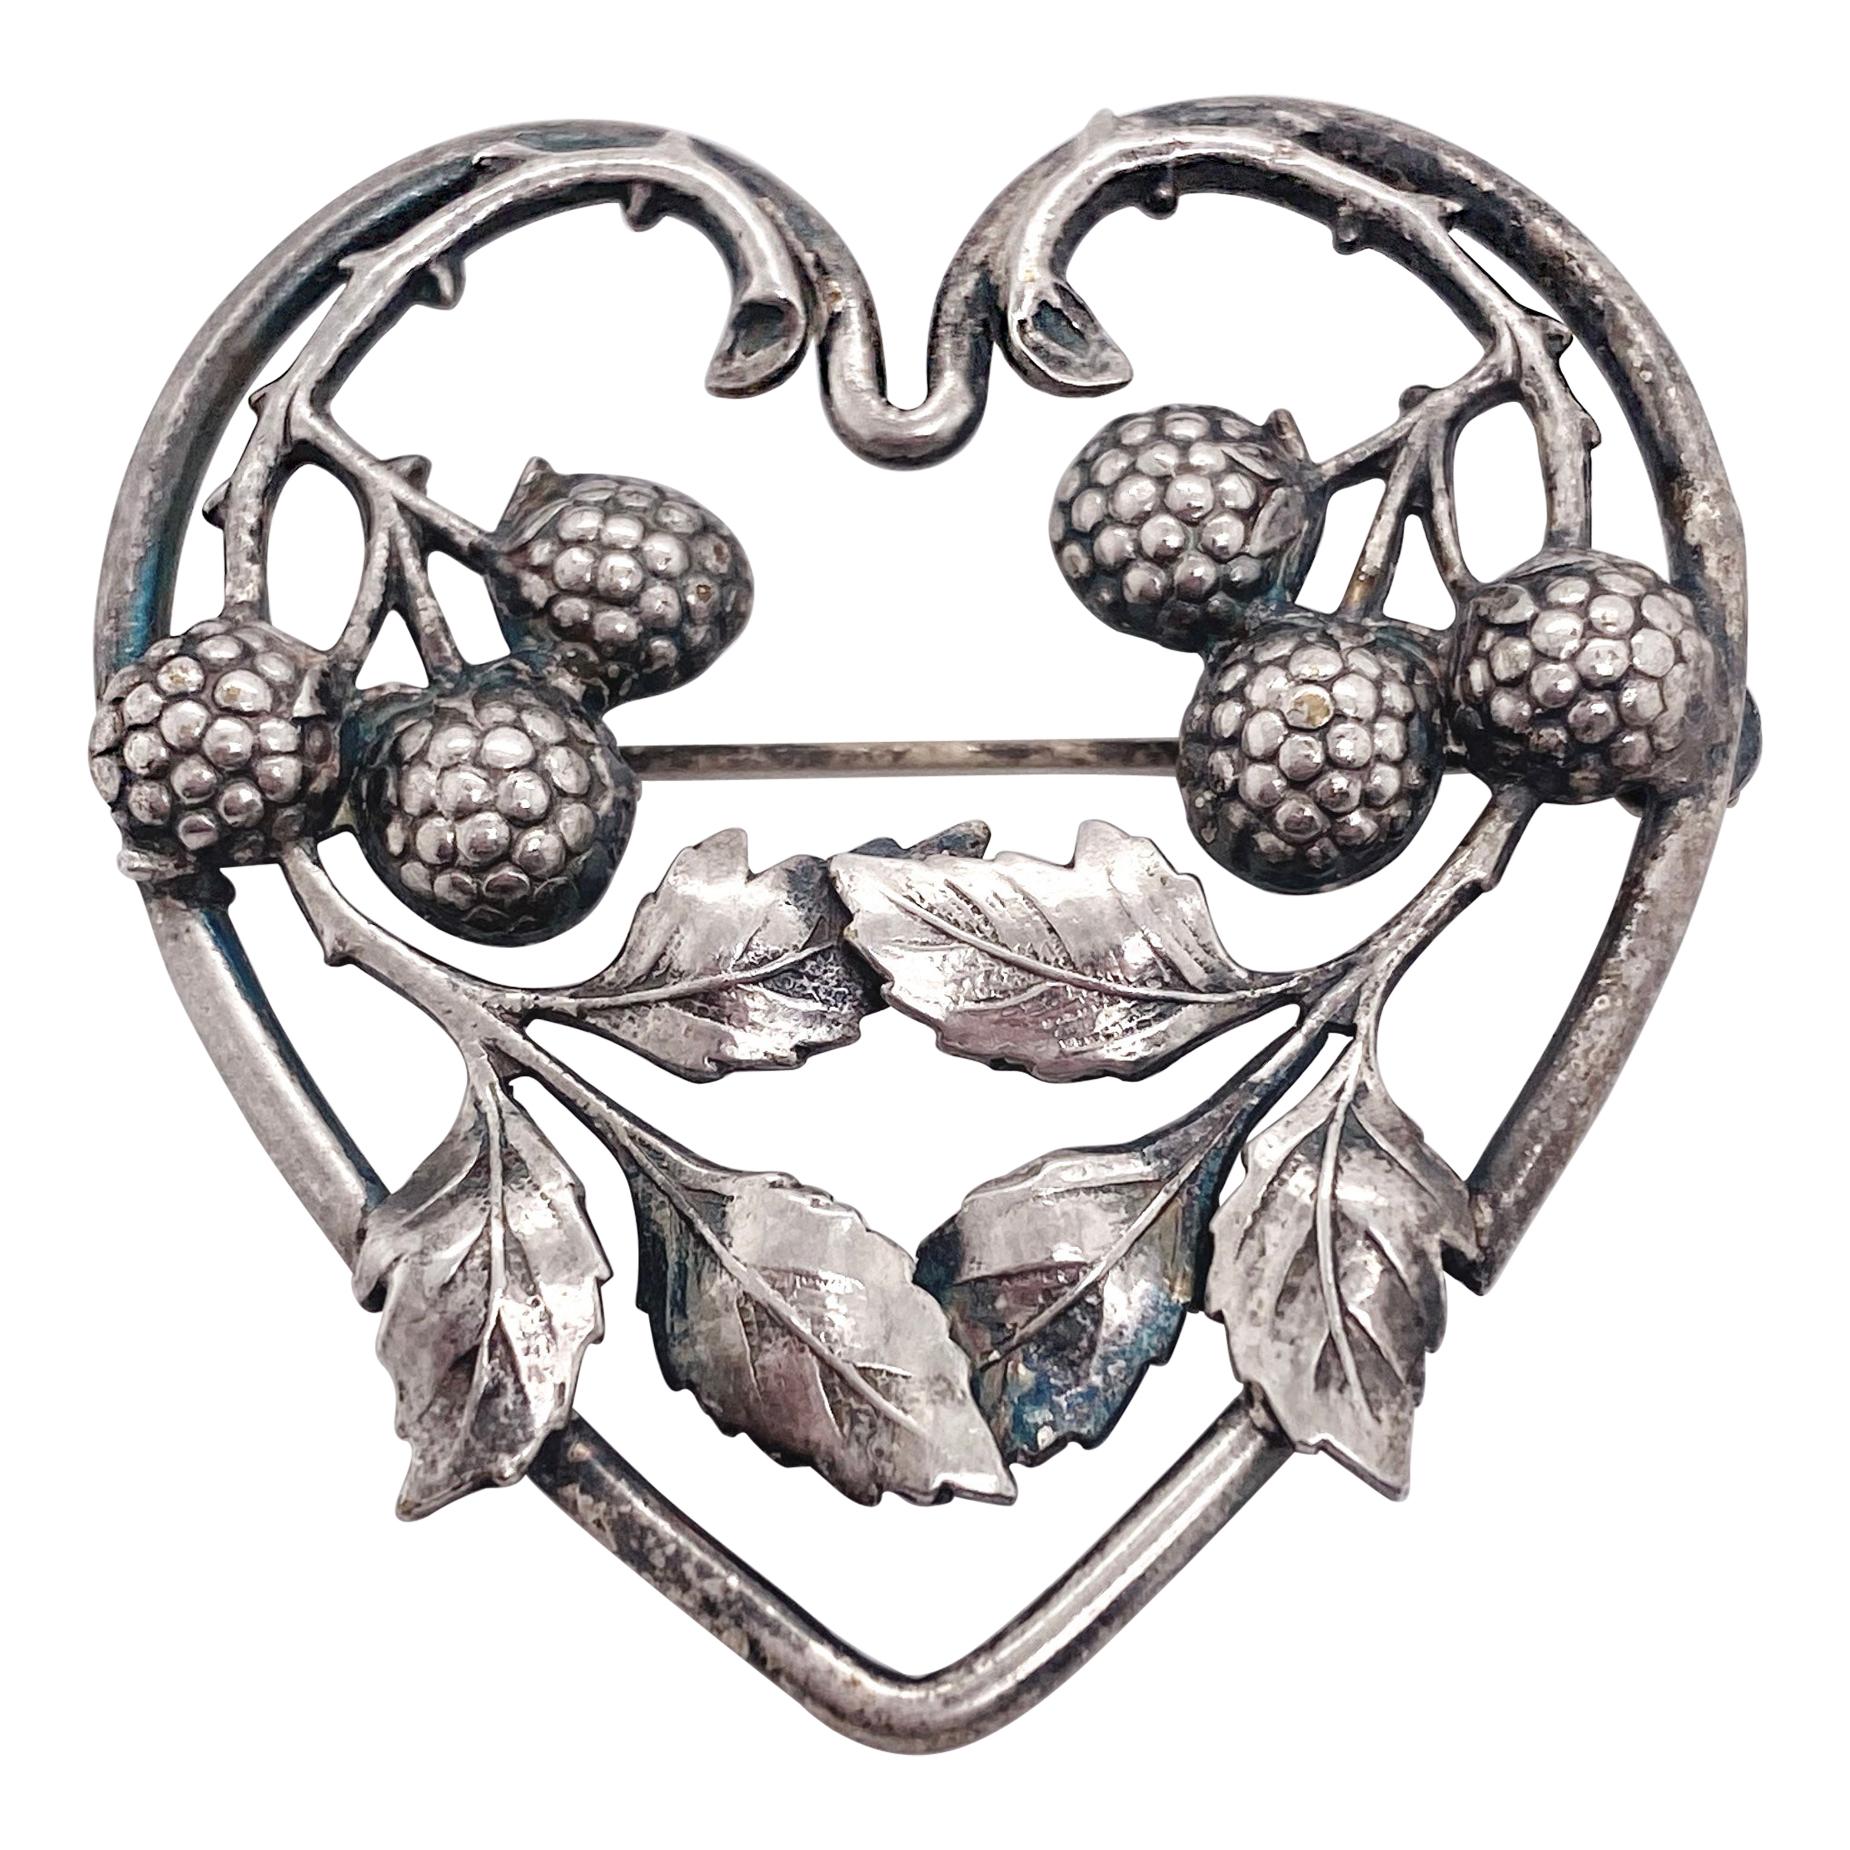 Acorn Heart Brooch Sterling Silver Vine Heart, Large Nature Inspired, circa 1869